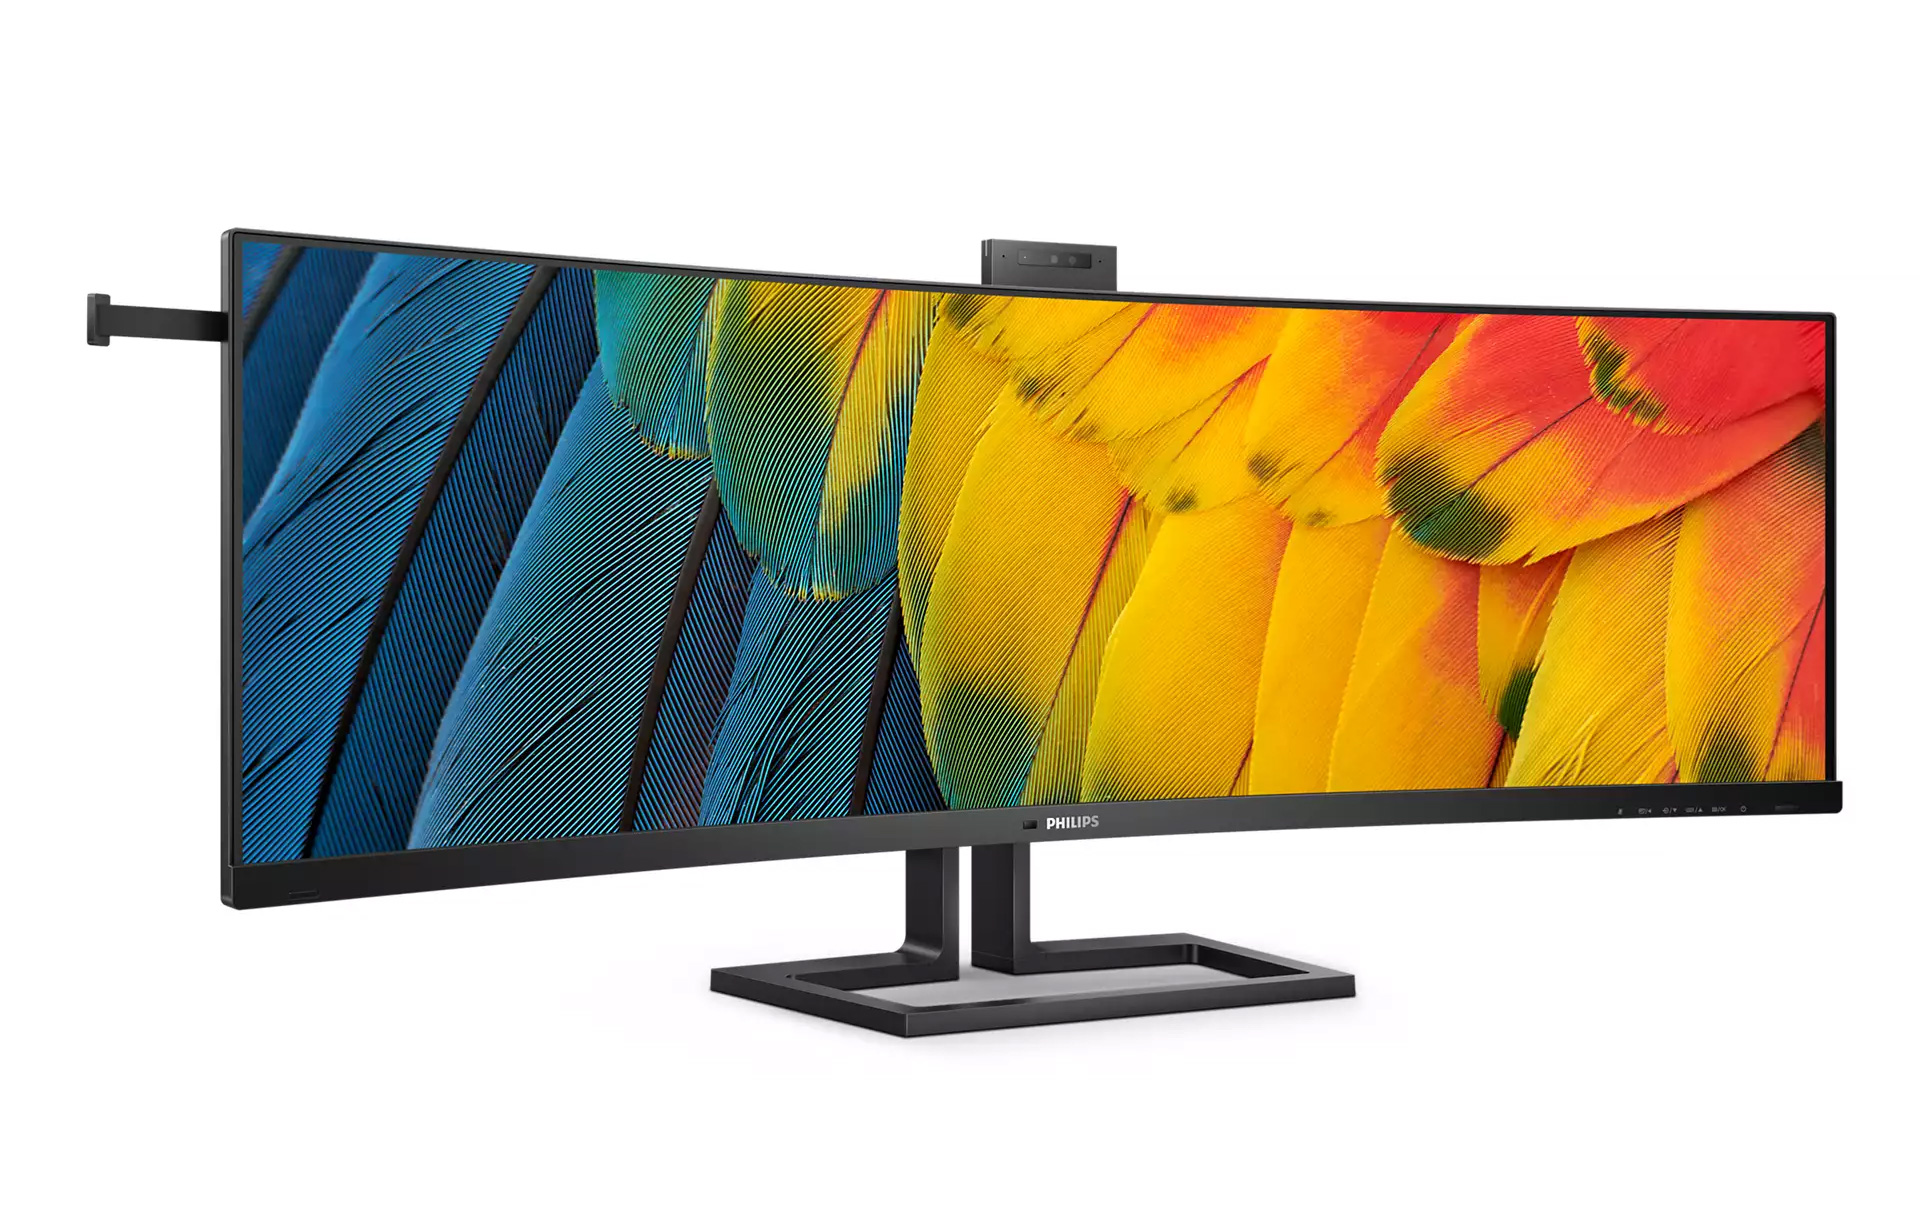 Slang Interpunctie heldin Philips reveals 45-inch ultra-wide monitors with KVM switches and USB  Type-C ports - NotebookCheck.net News